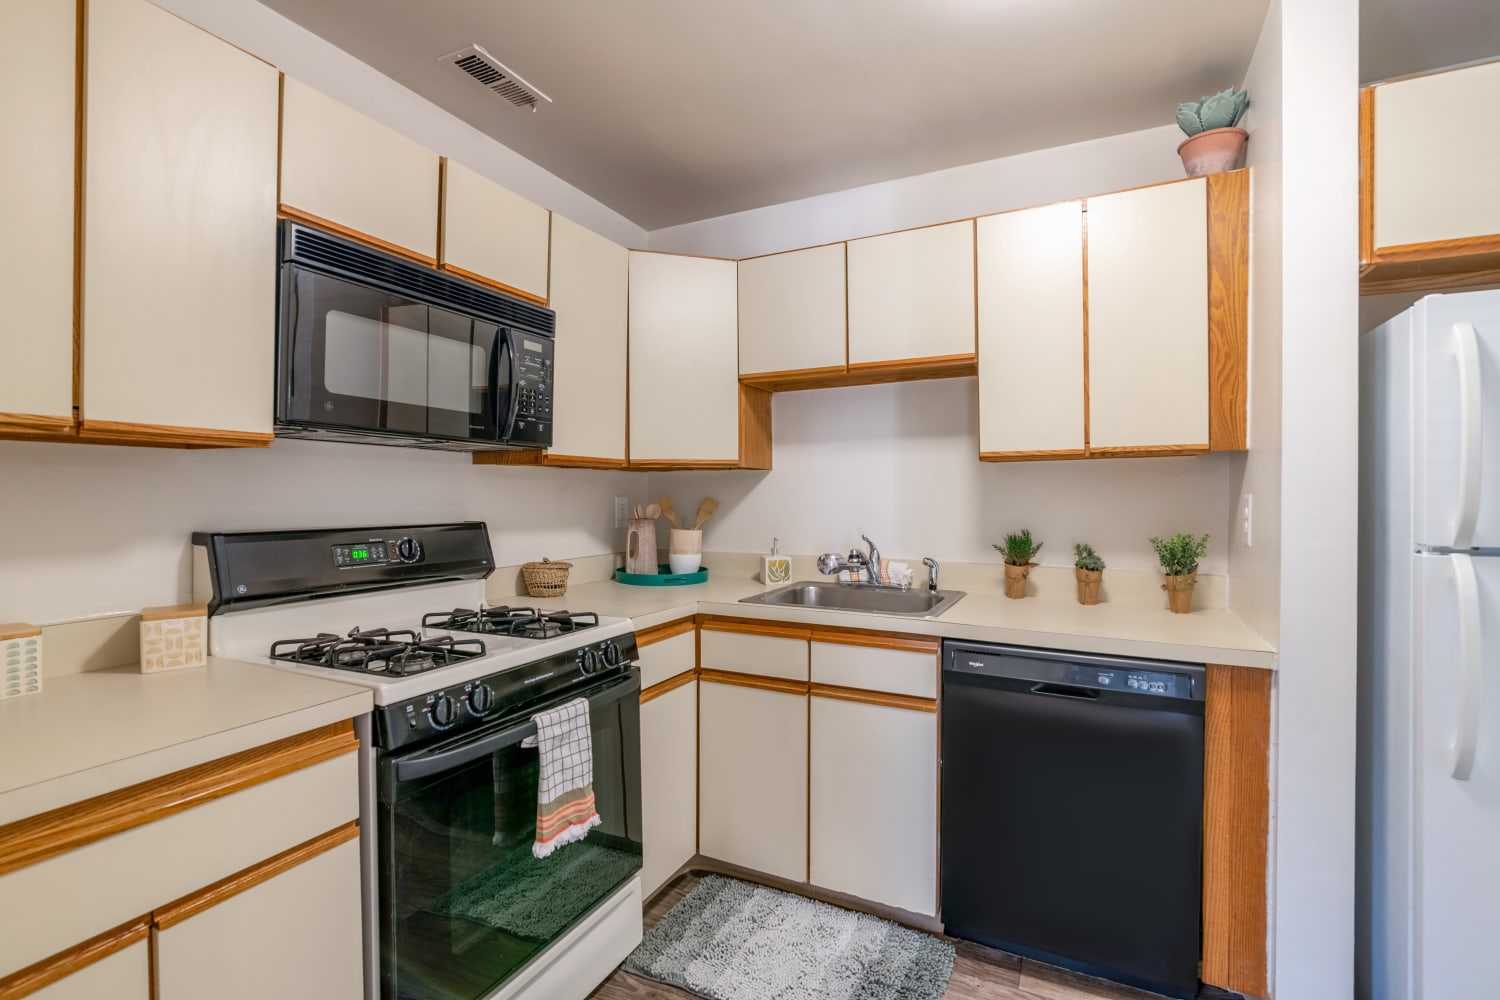 Kitchen at Cranbury Crossing Apartment Homes in East Brunswick, New Jersey